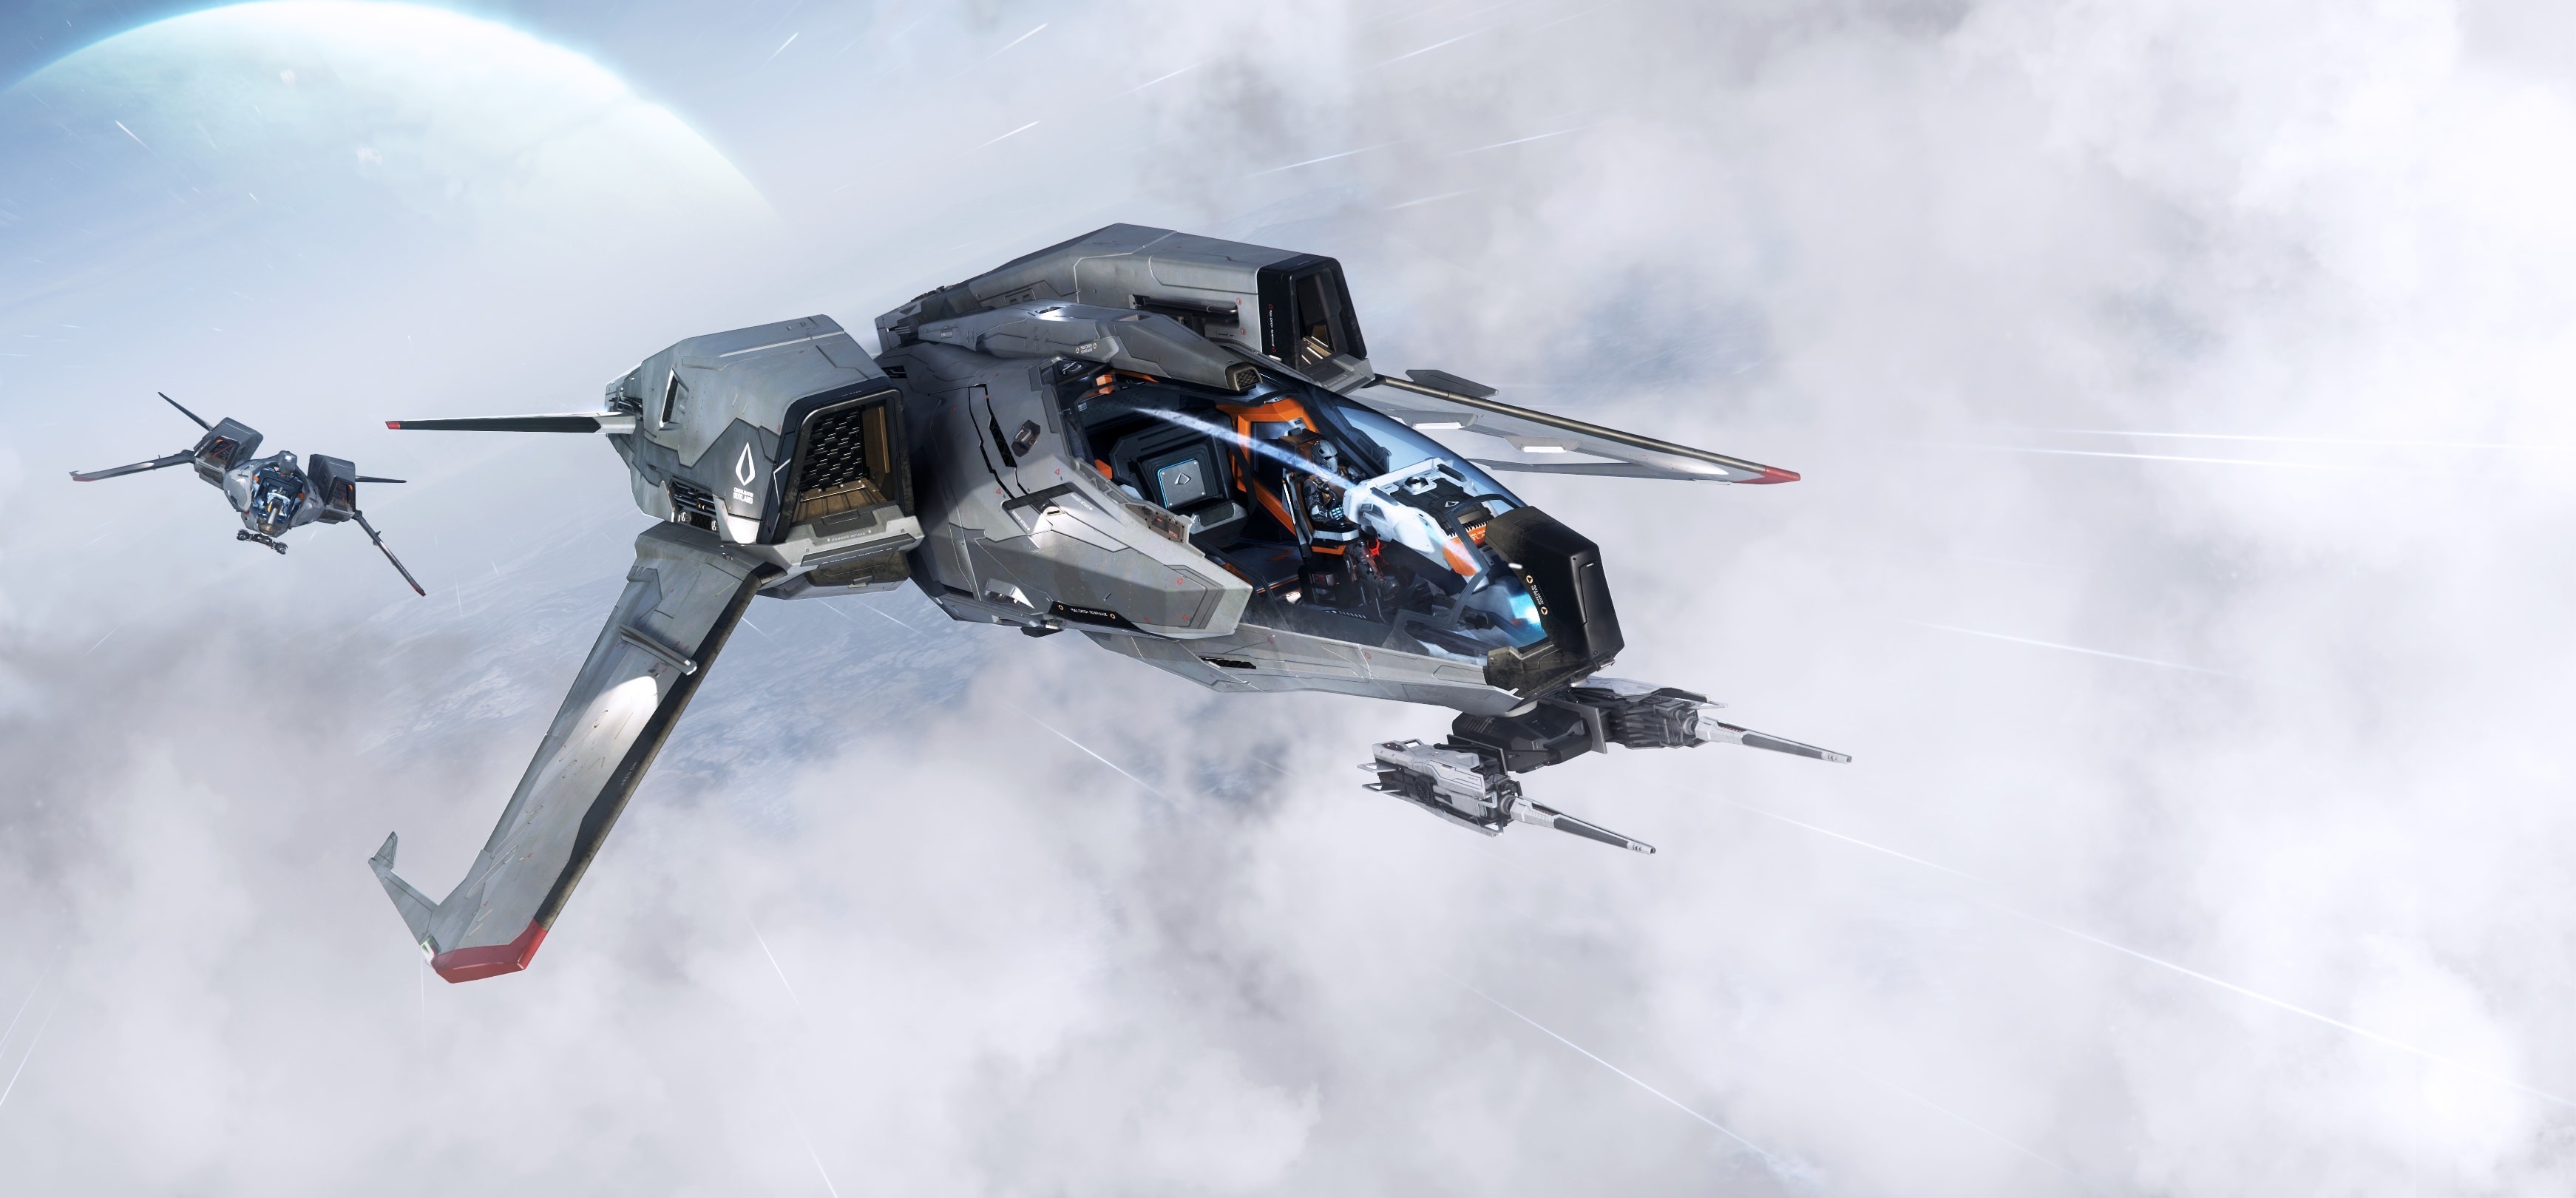 free download star citizen call to arms